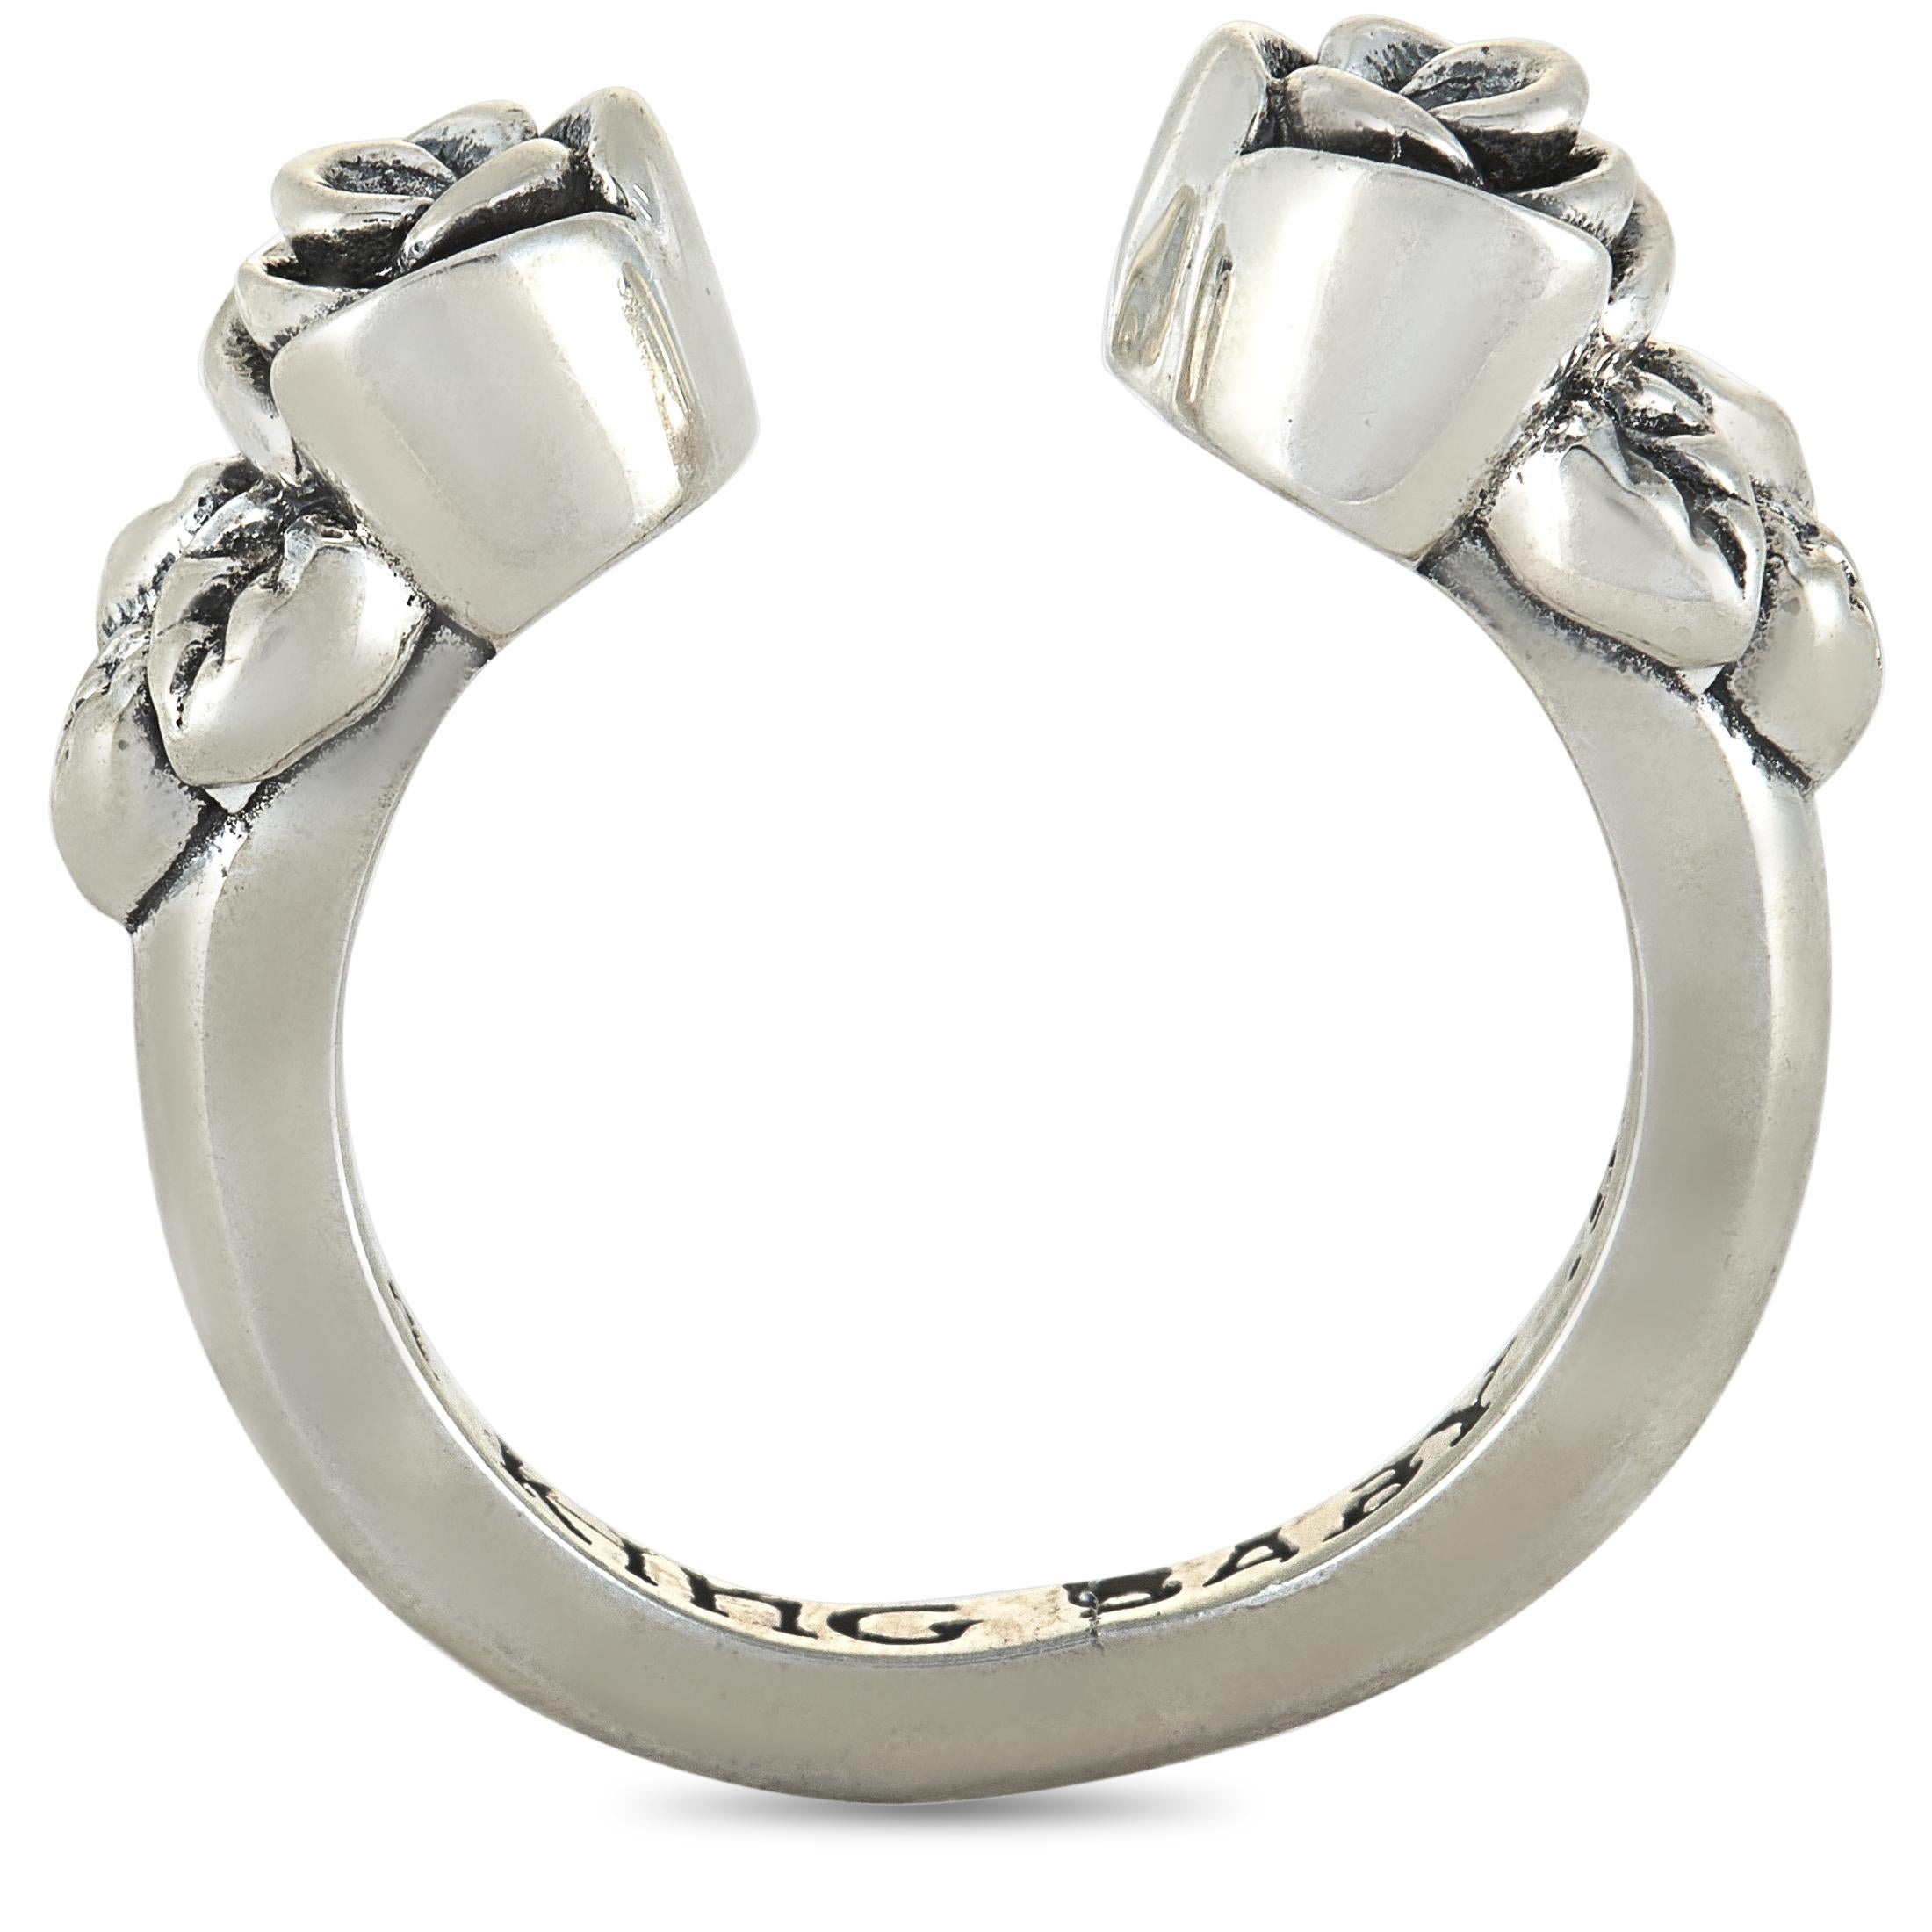 This King Baby ring is crafted from sterling silver and weighs 6.5 grams. The ring boasts band thickness of 3 mm and top height of 6 mm, while top dimensions measure 24 by 6 mm.

Offered in brand new condition, this jewelry piece includes the